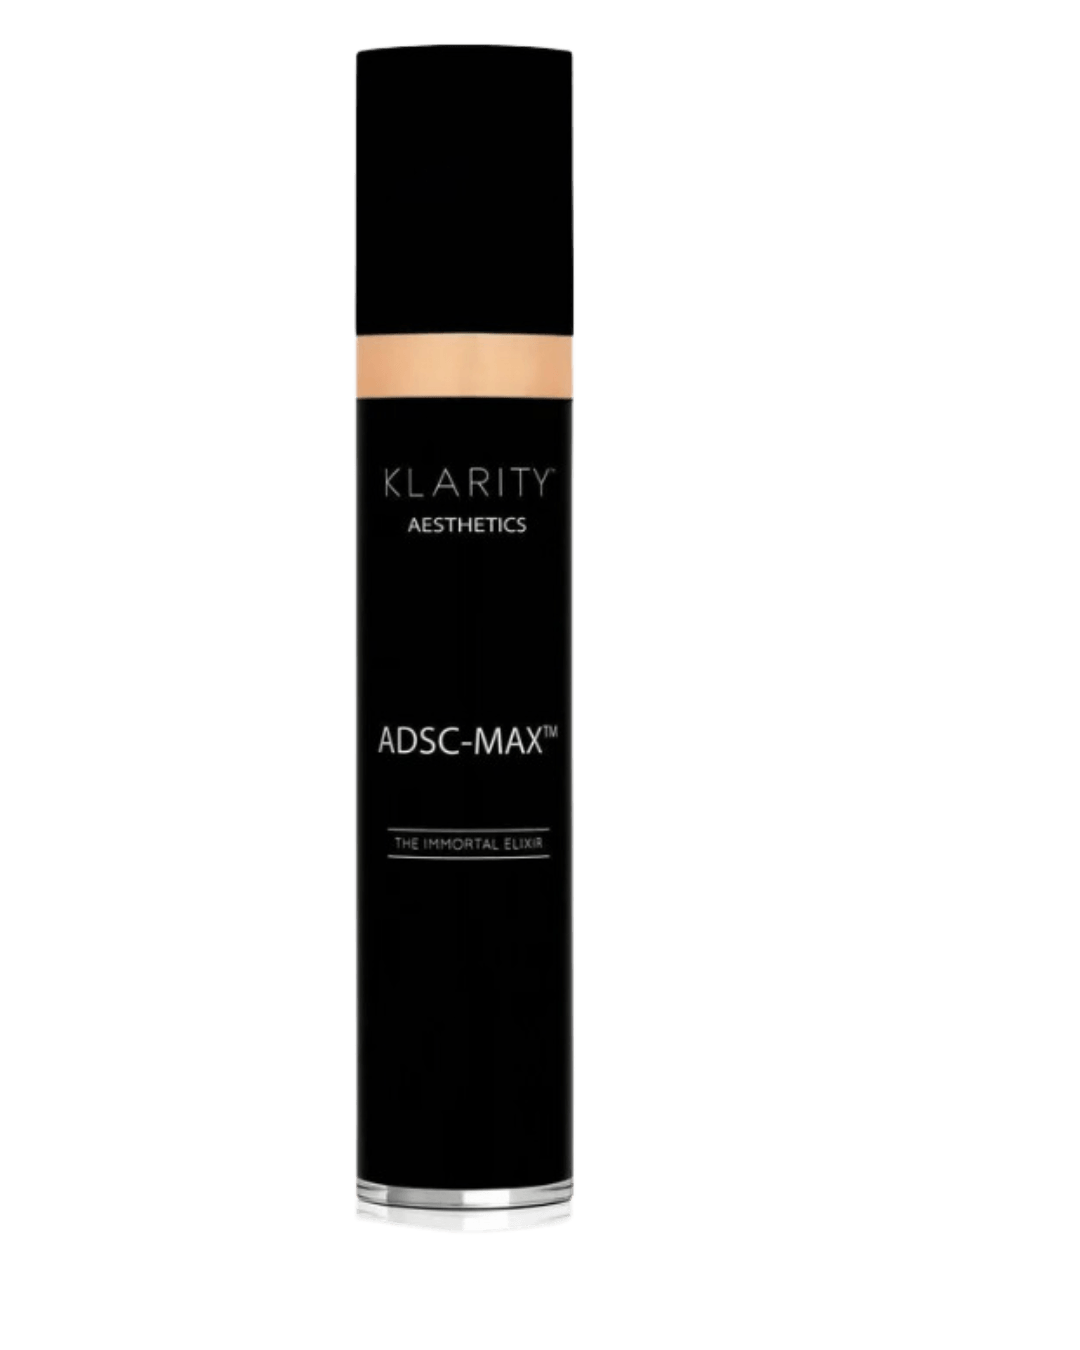 Daily Vanity Beauty Awards 2024 Best Skincare Klarity Skincare The Immortal Elixir Voted By Beauty Experts